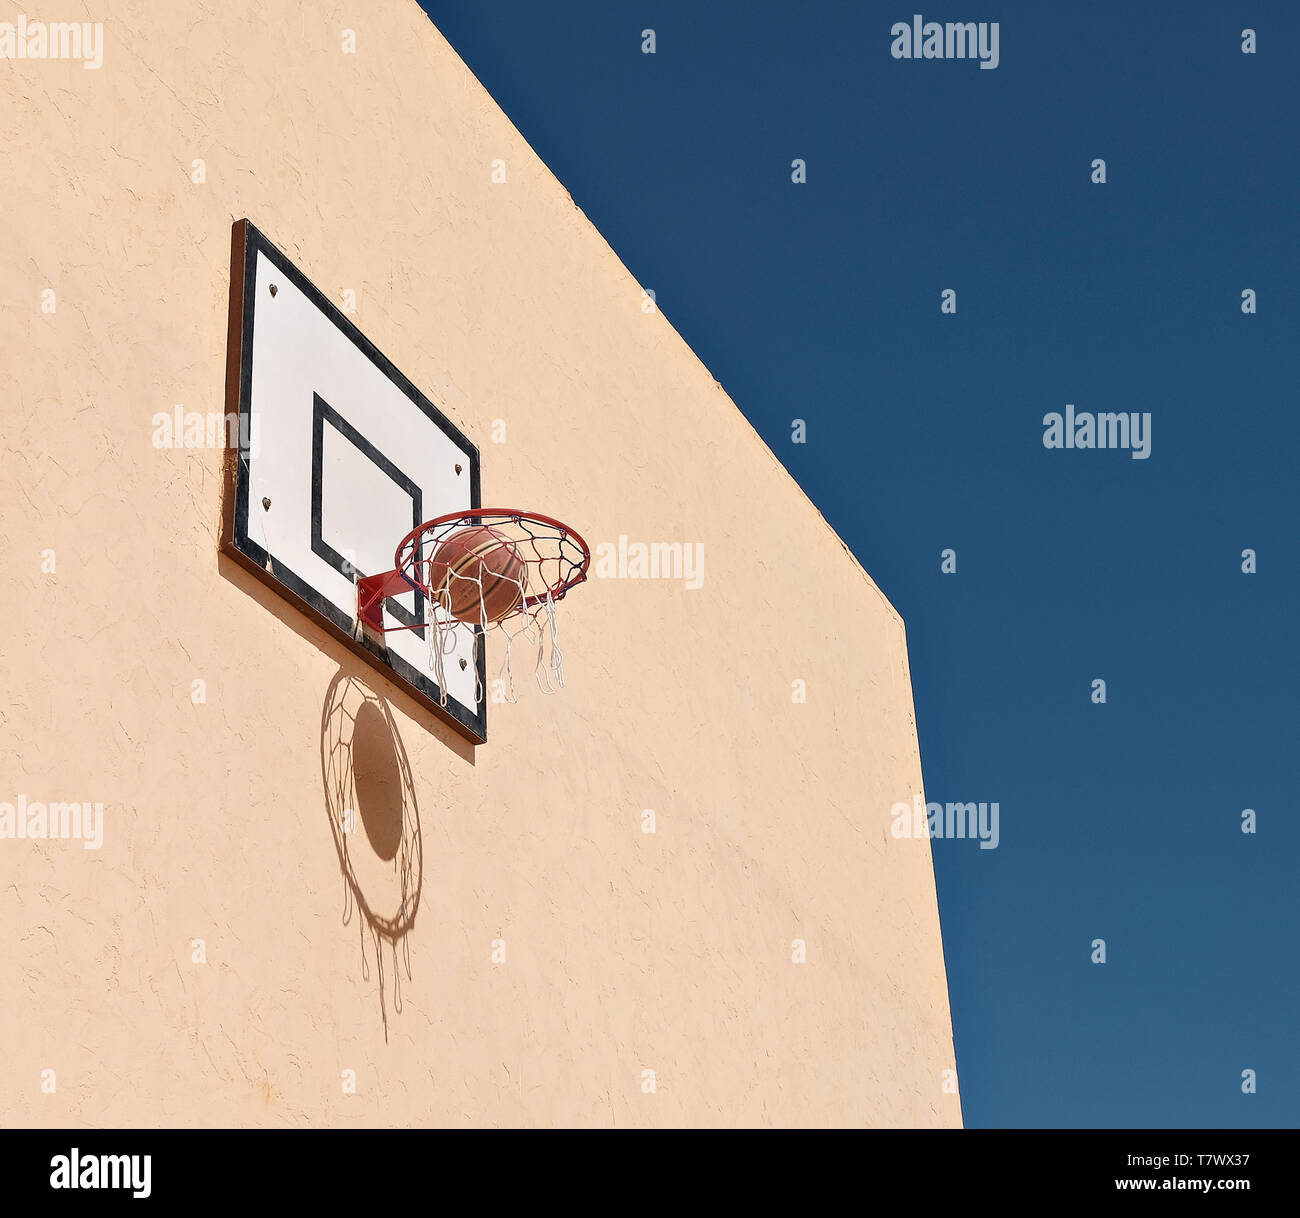 basketball in basketball hoop against yellow wall. The ball and net create a shadow on the wall. Stock Photo